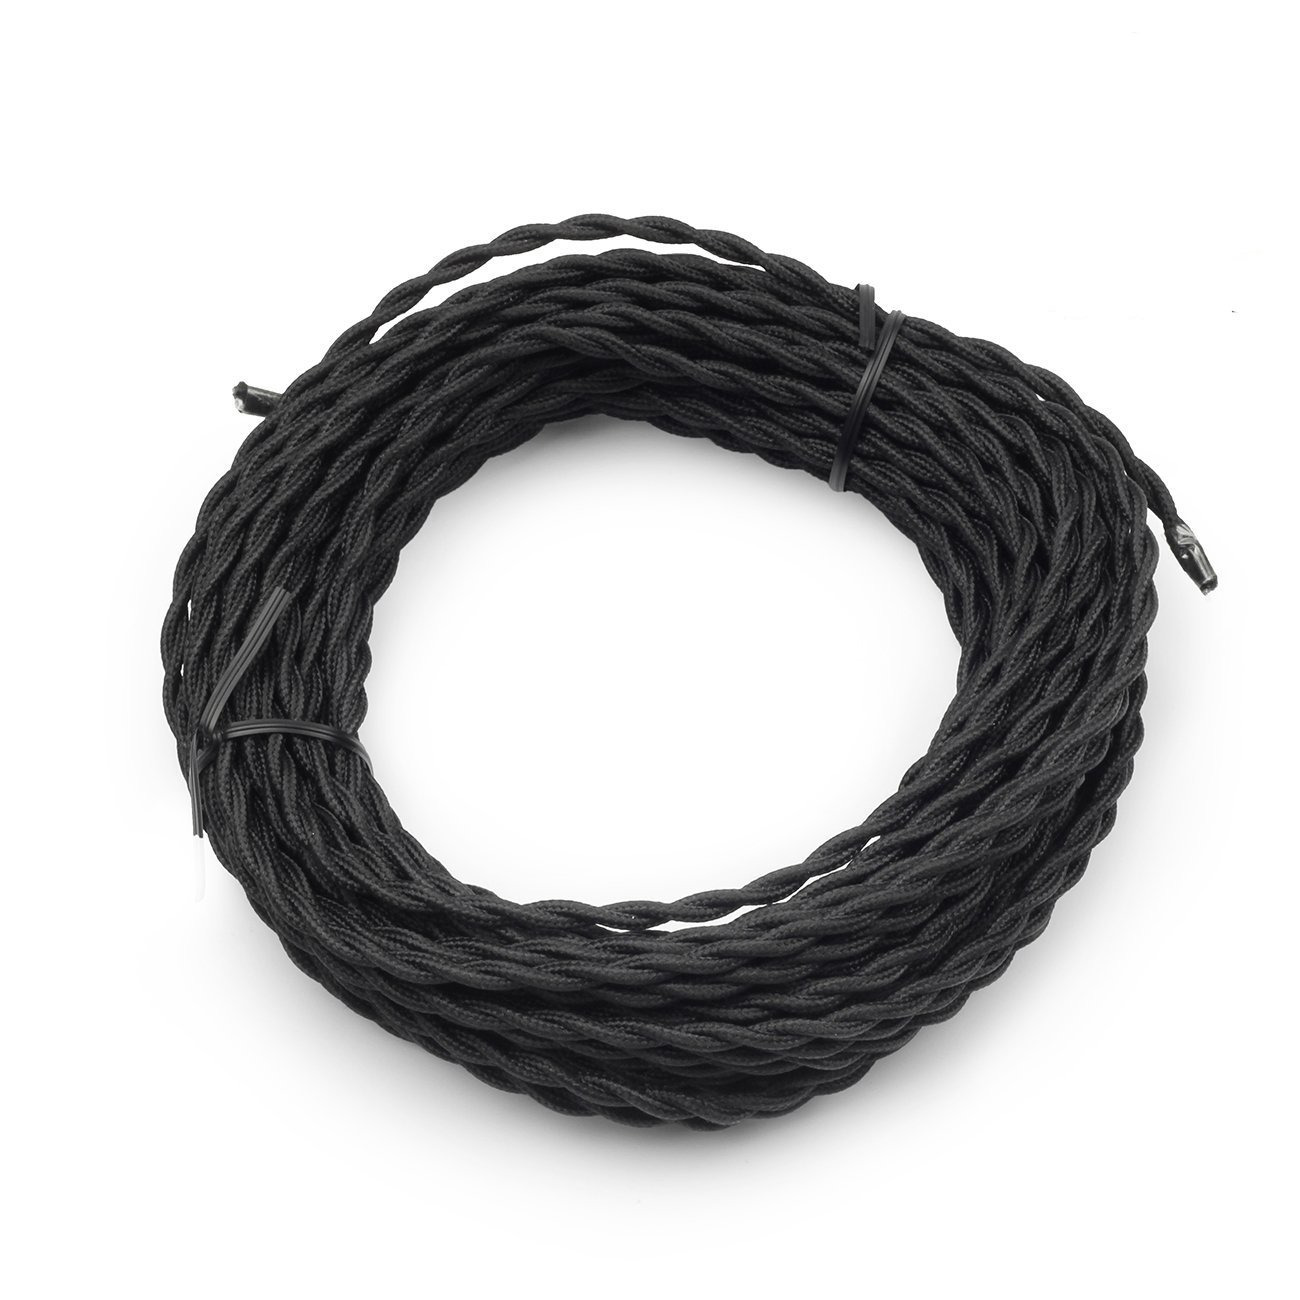 Supmart Black Twisted Cloth Covered Wire, 2-Conductor 18-Gauge Antique Fabric 50